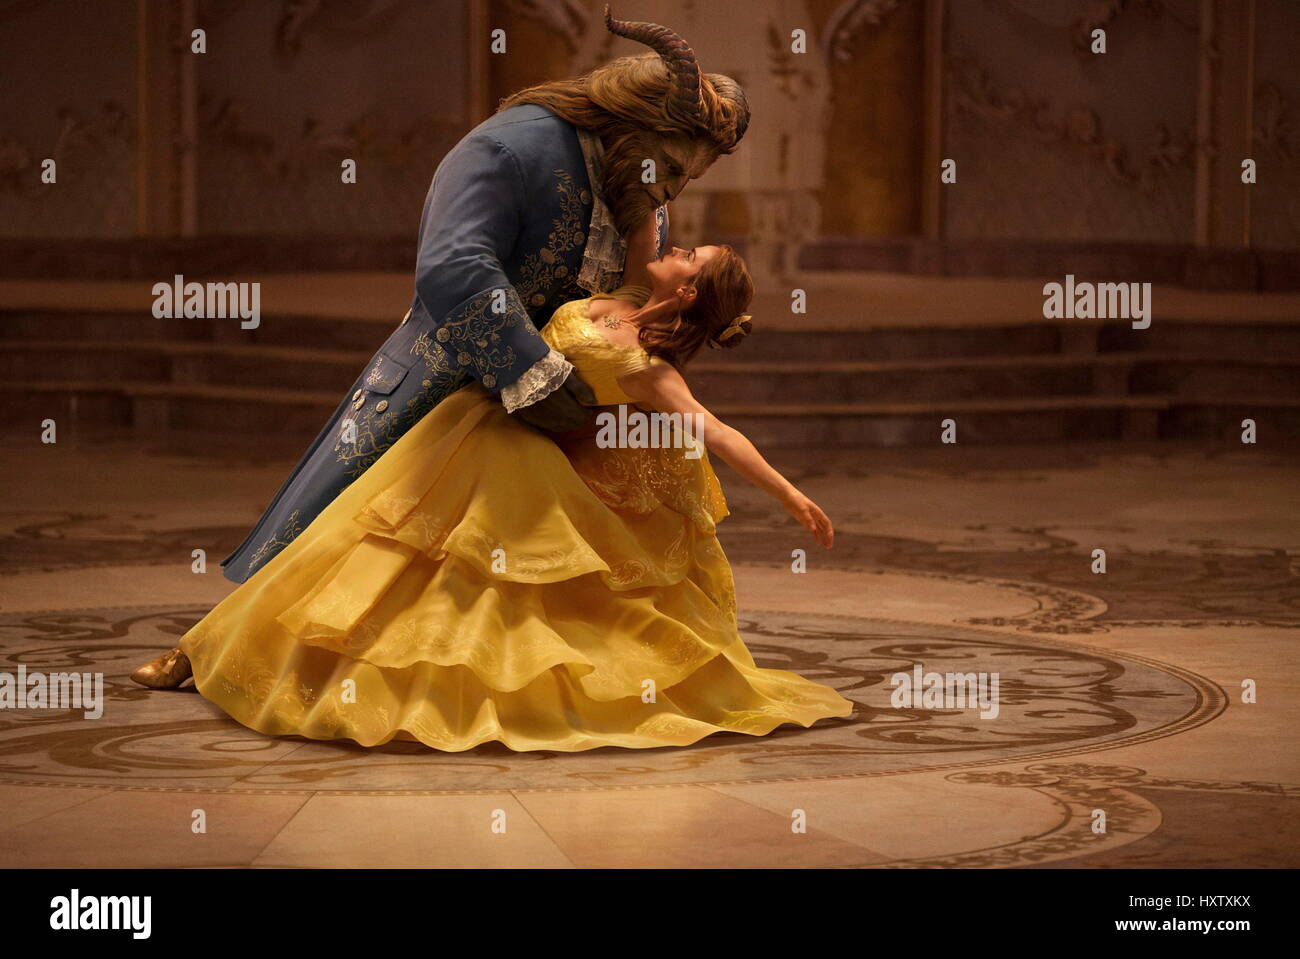 RELEASE DATE: March 17, 2017 TITLE: Beauty and the Beast STUDIO: Walt Disney Pictures DIRECTOR: Bill Condon PLOT: An adaptation of the fairy tale about a monstrous-looking prince and a young woman who fall in love. STARRING: Emma Watson as Belle, Dan Stevens as Beast. (Credit: © Walt Disney Pictures/Entertainment Pictures) Stock Photo